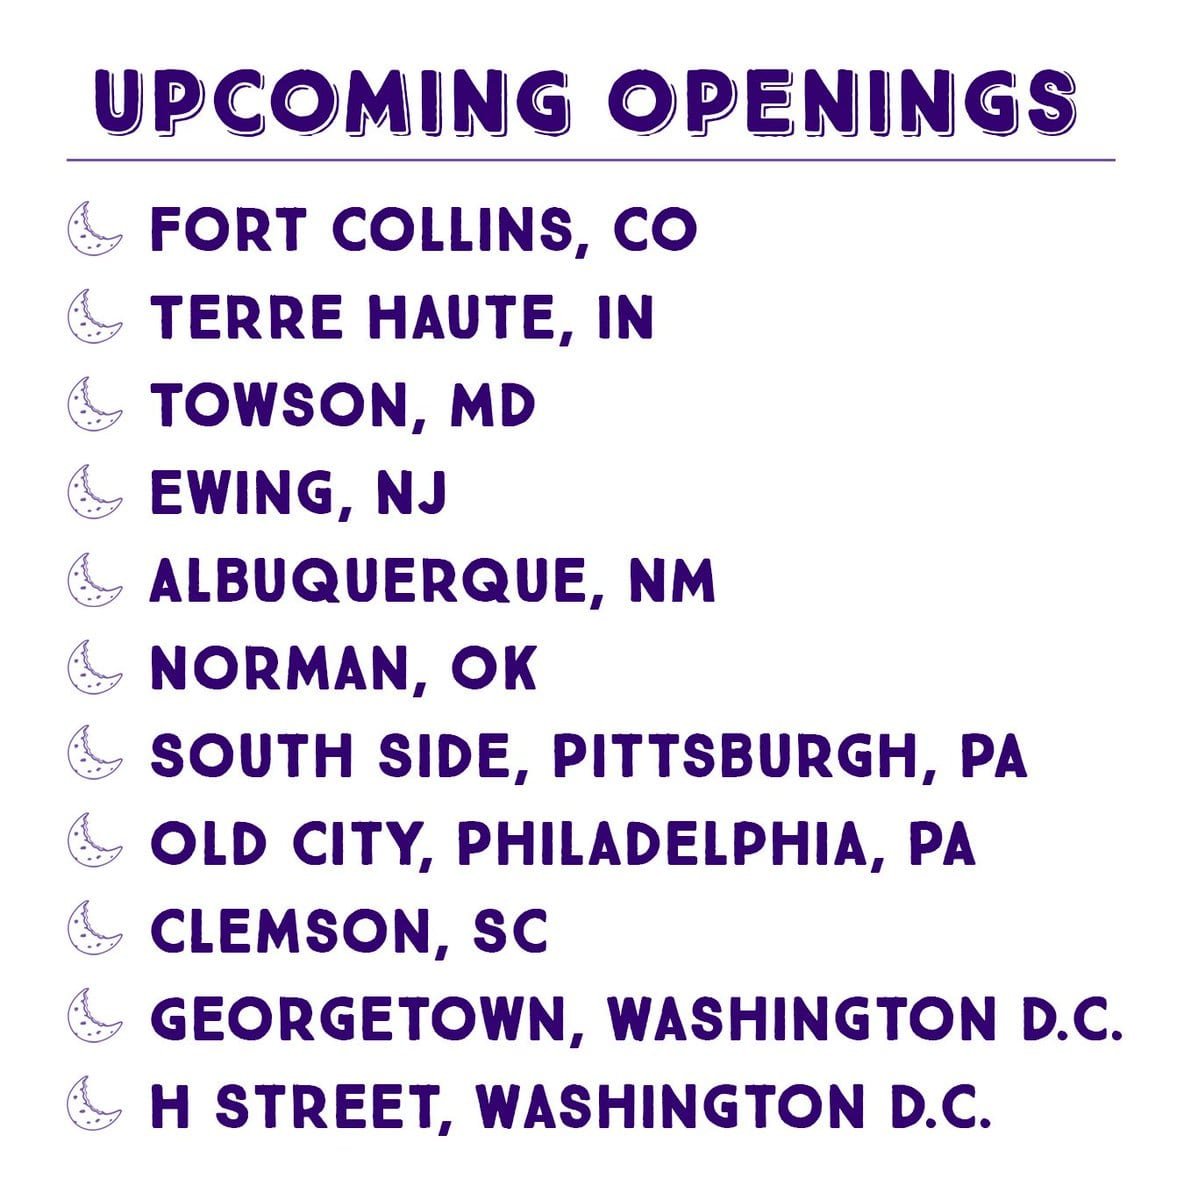 Insomnia Cookies On Twitter   More Cookies Are On The Way! Check